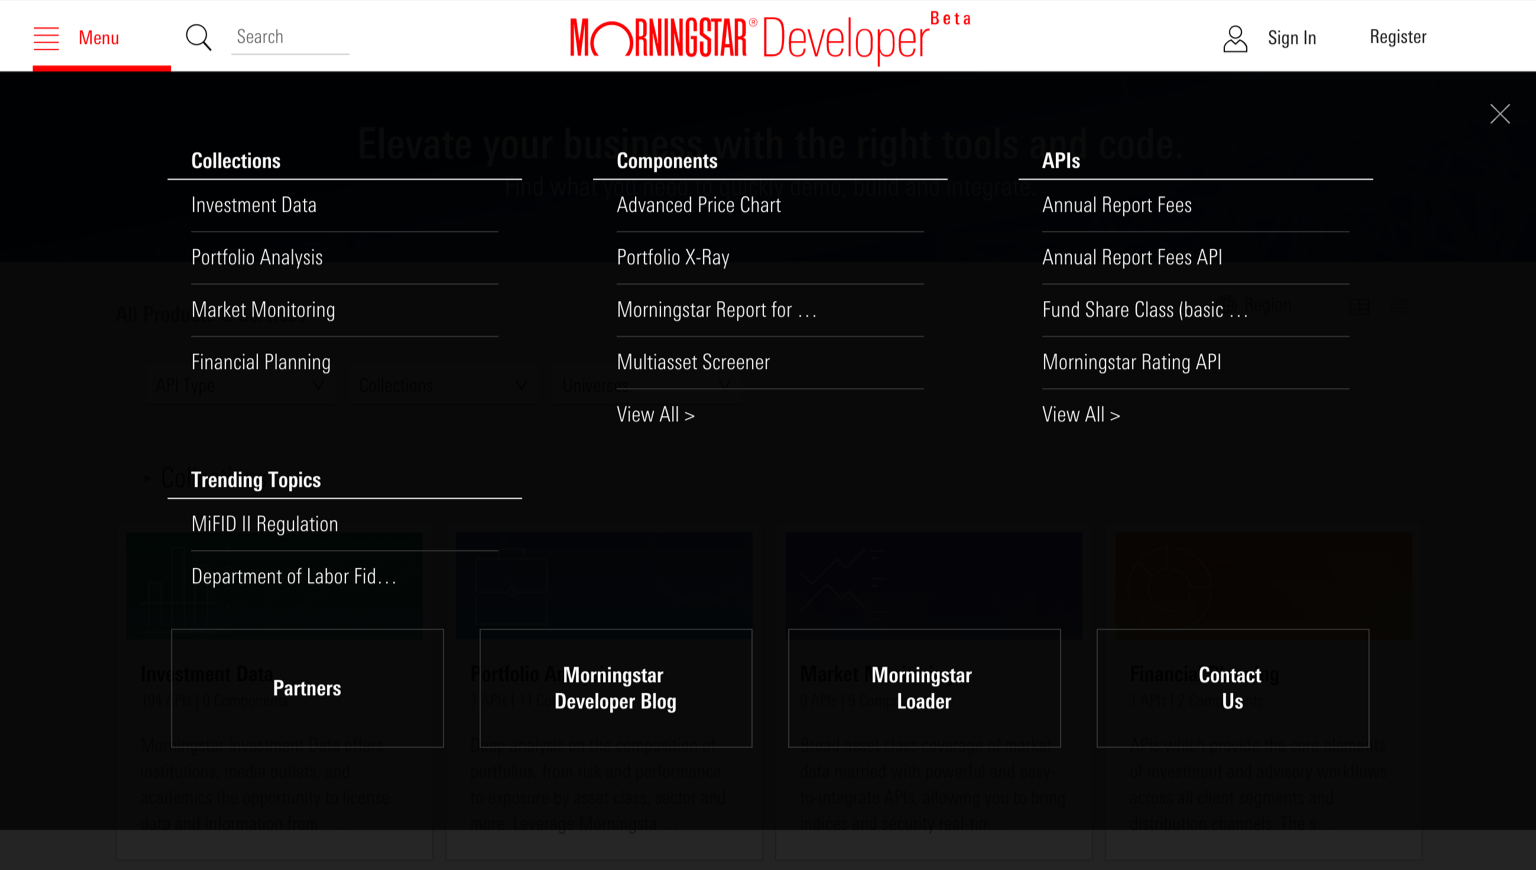 Example of a navigation container on the Morningstar Developer site.